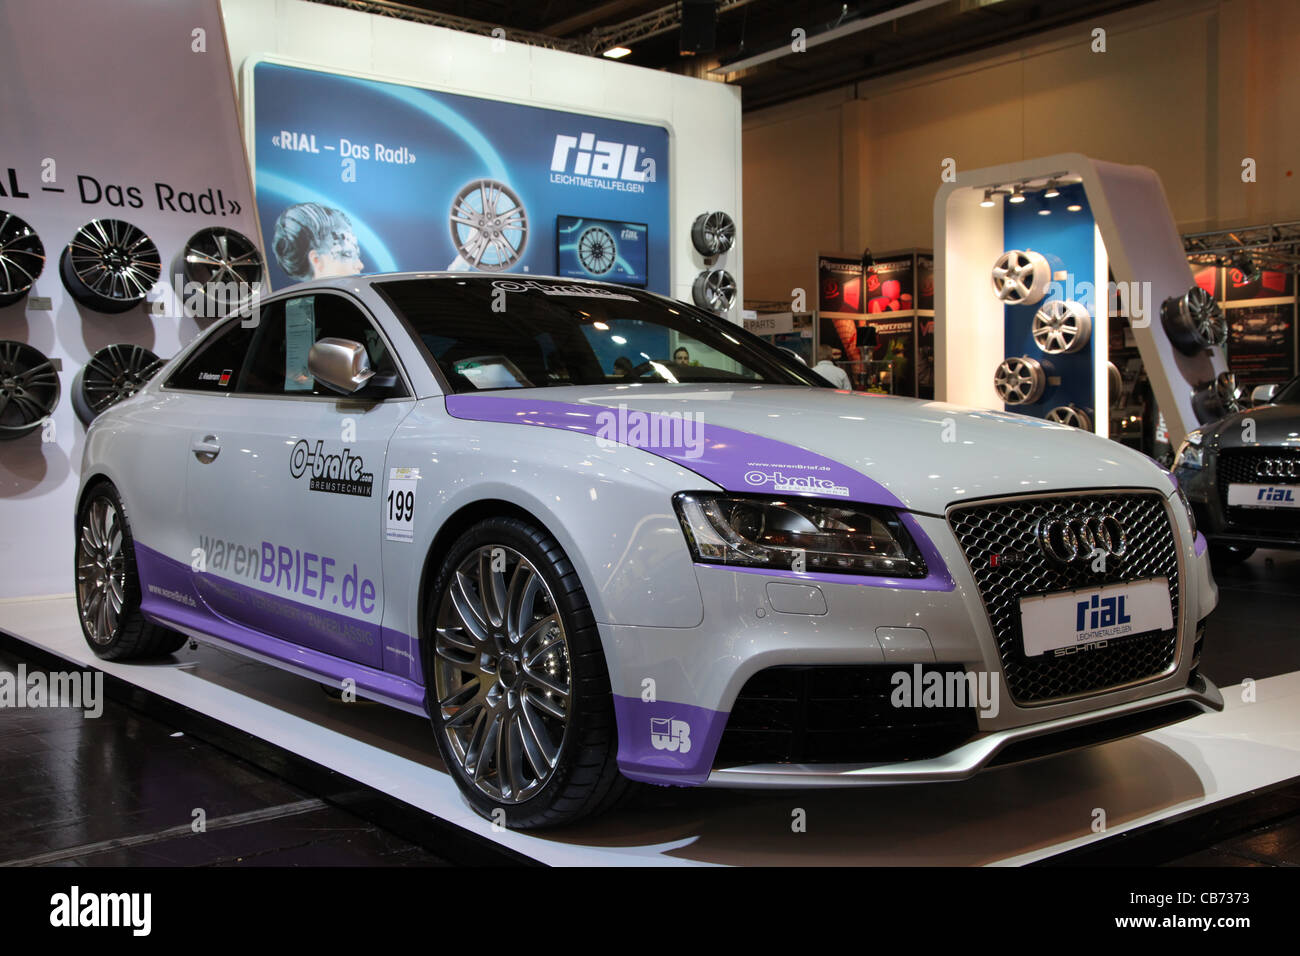 Audi RS5 Coupe at Rial stand - the aluminum wheels manufacturer at the Essen Motor Show in Essen, Germany, on November 29, 2011 Stock Photo